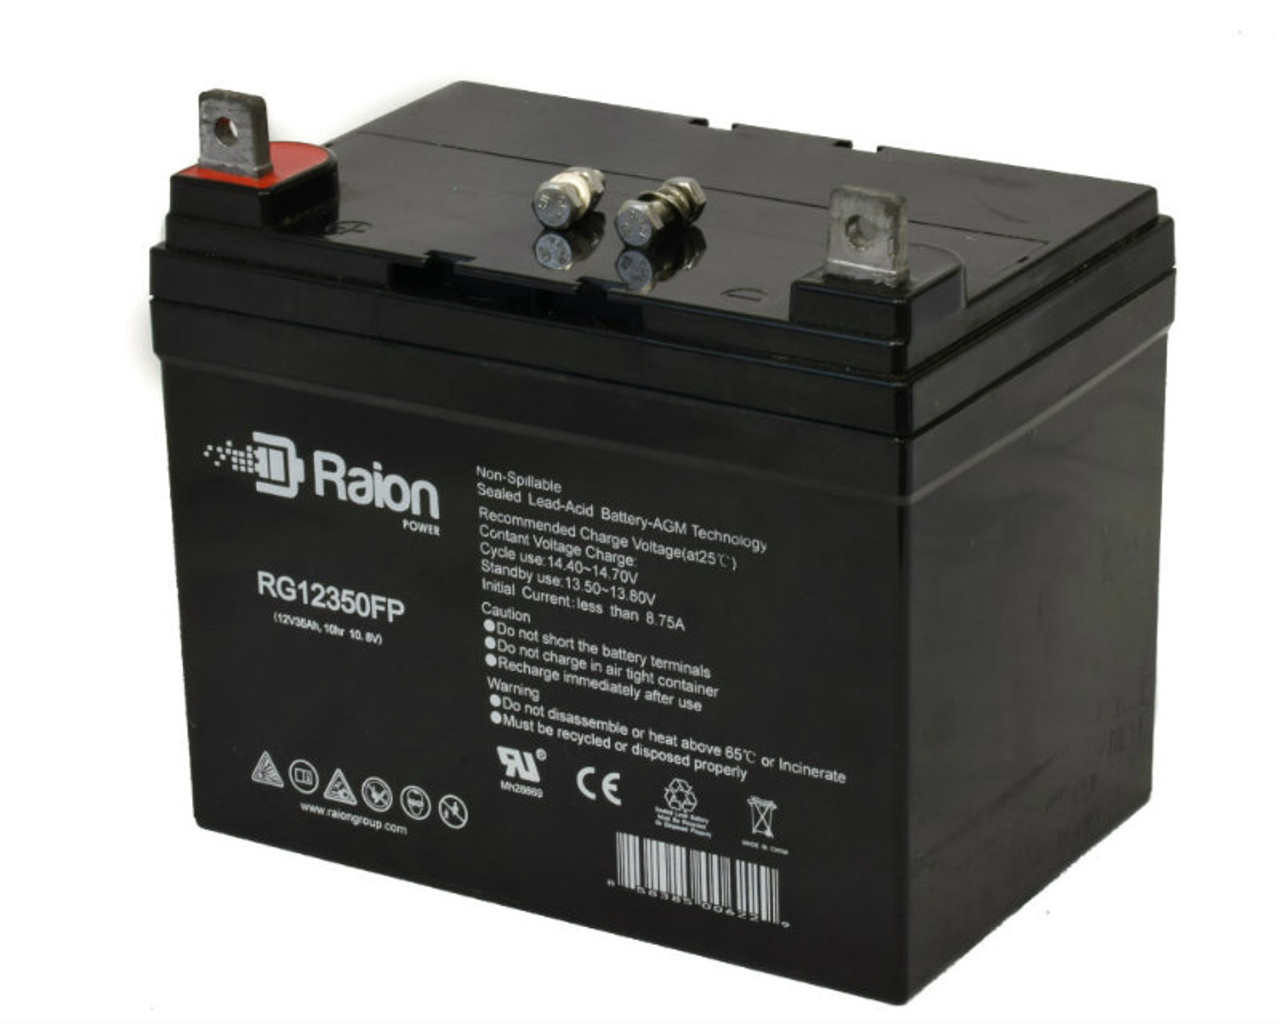 Raion Power Replacement 12V 35Ah RG12350FP Battery for Technacell EPUPS31